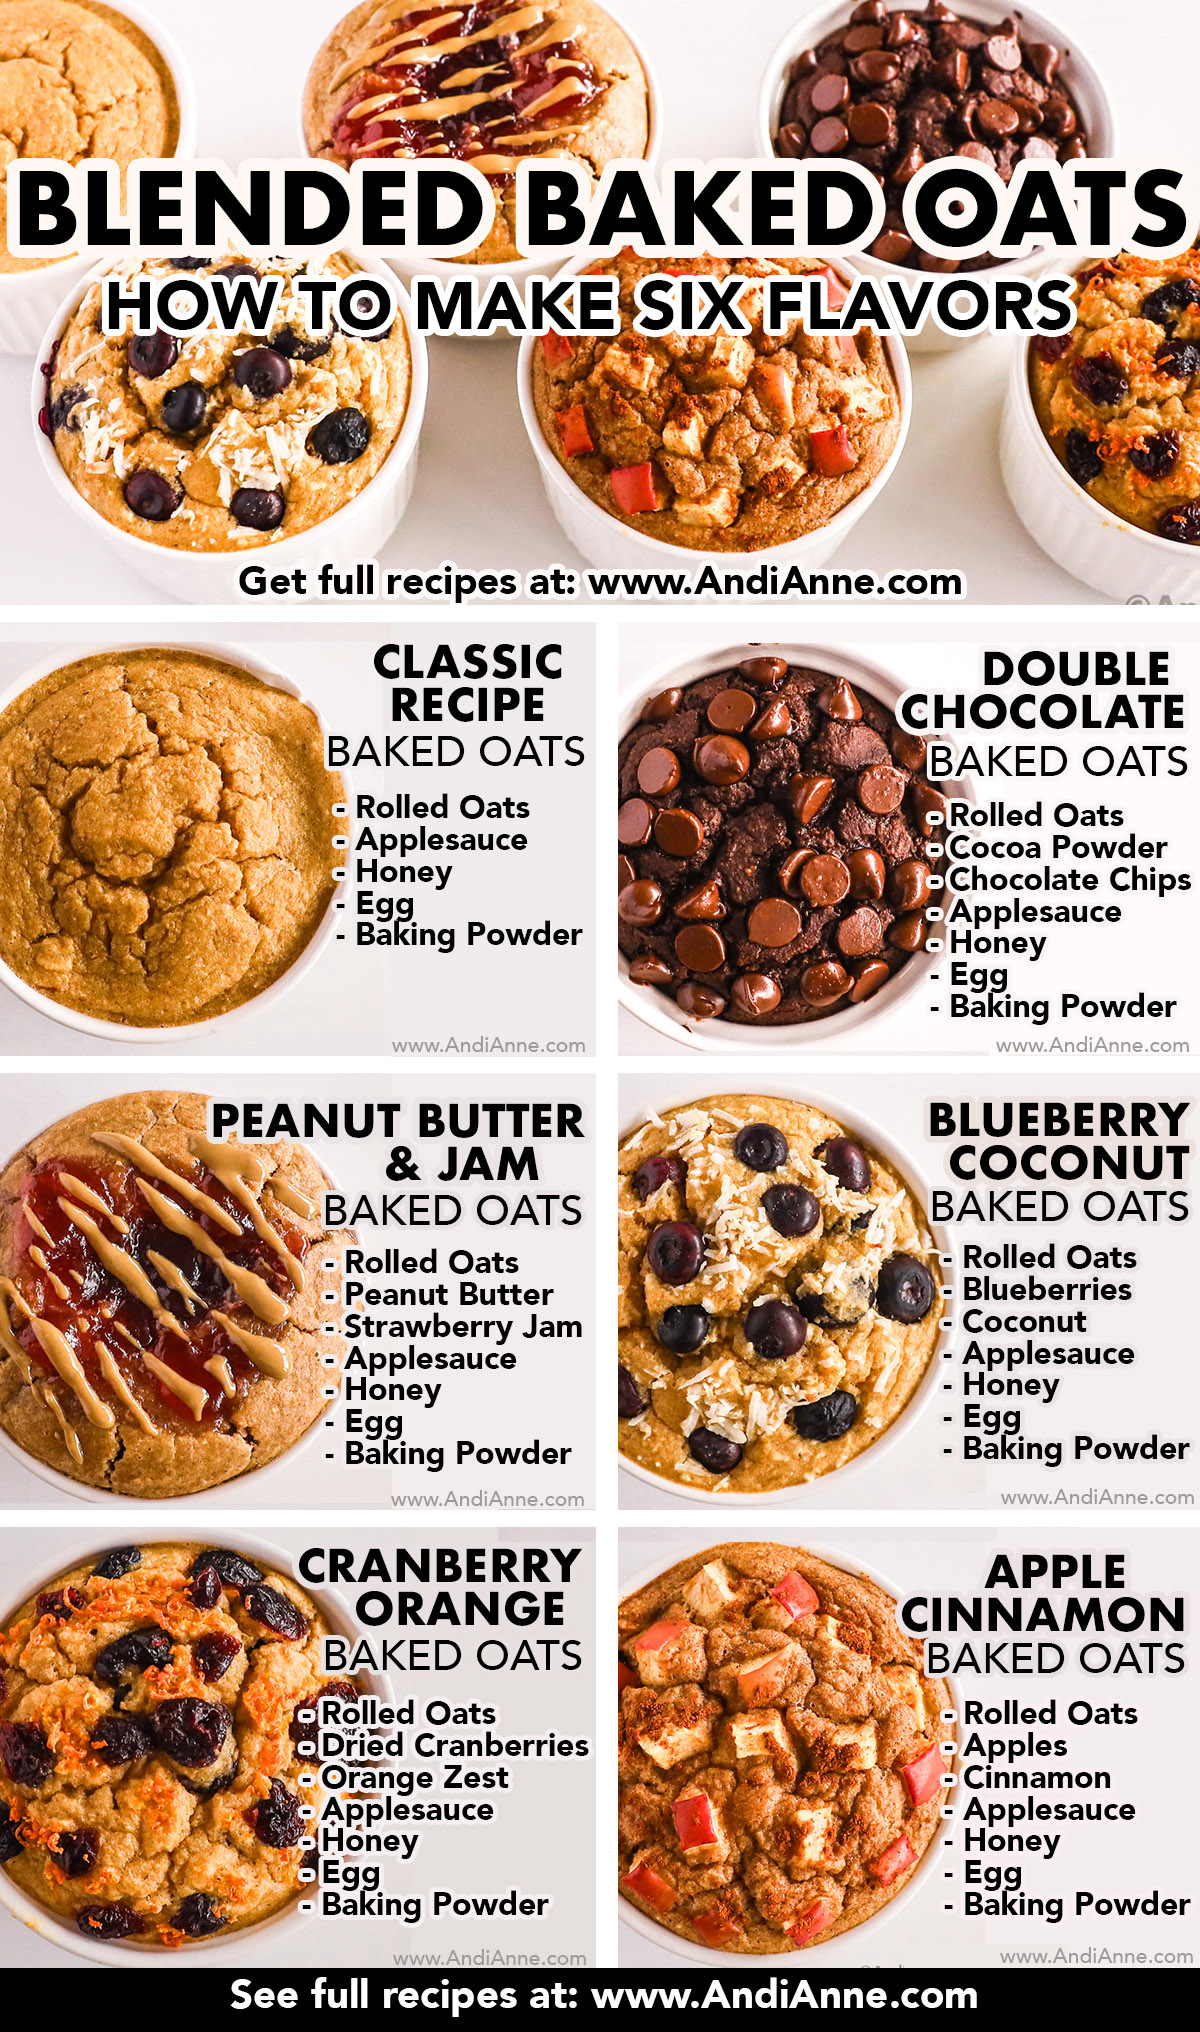 Six blended baked oat flavors in white ramekins. Flavors include classic recipe, double chocolate, peanut butter and jam, blueberry coconut, cranberry orange, and apple cinnamon. All have a list of ingredients written beside each one.